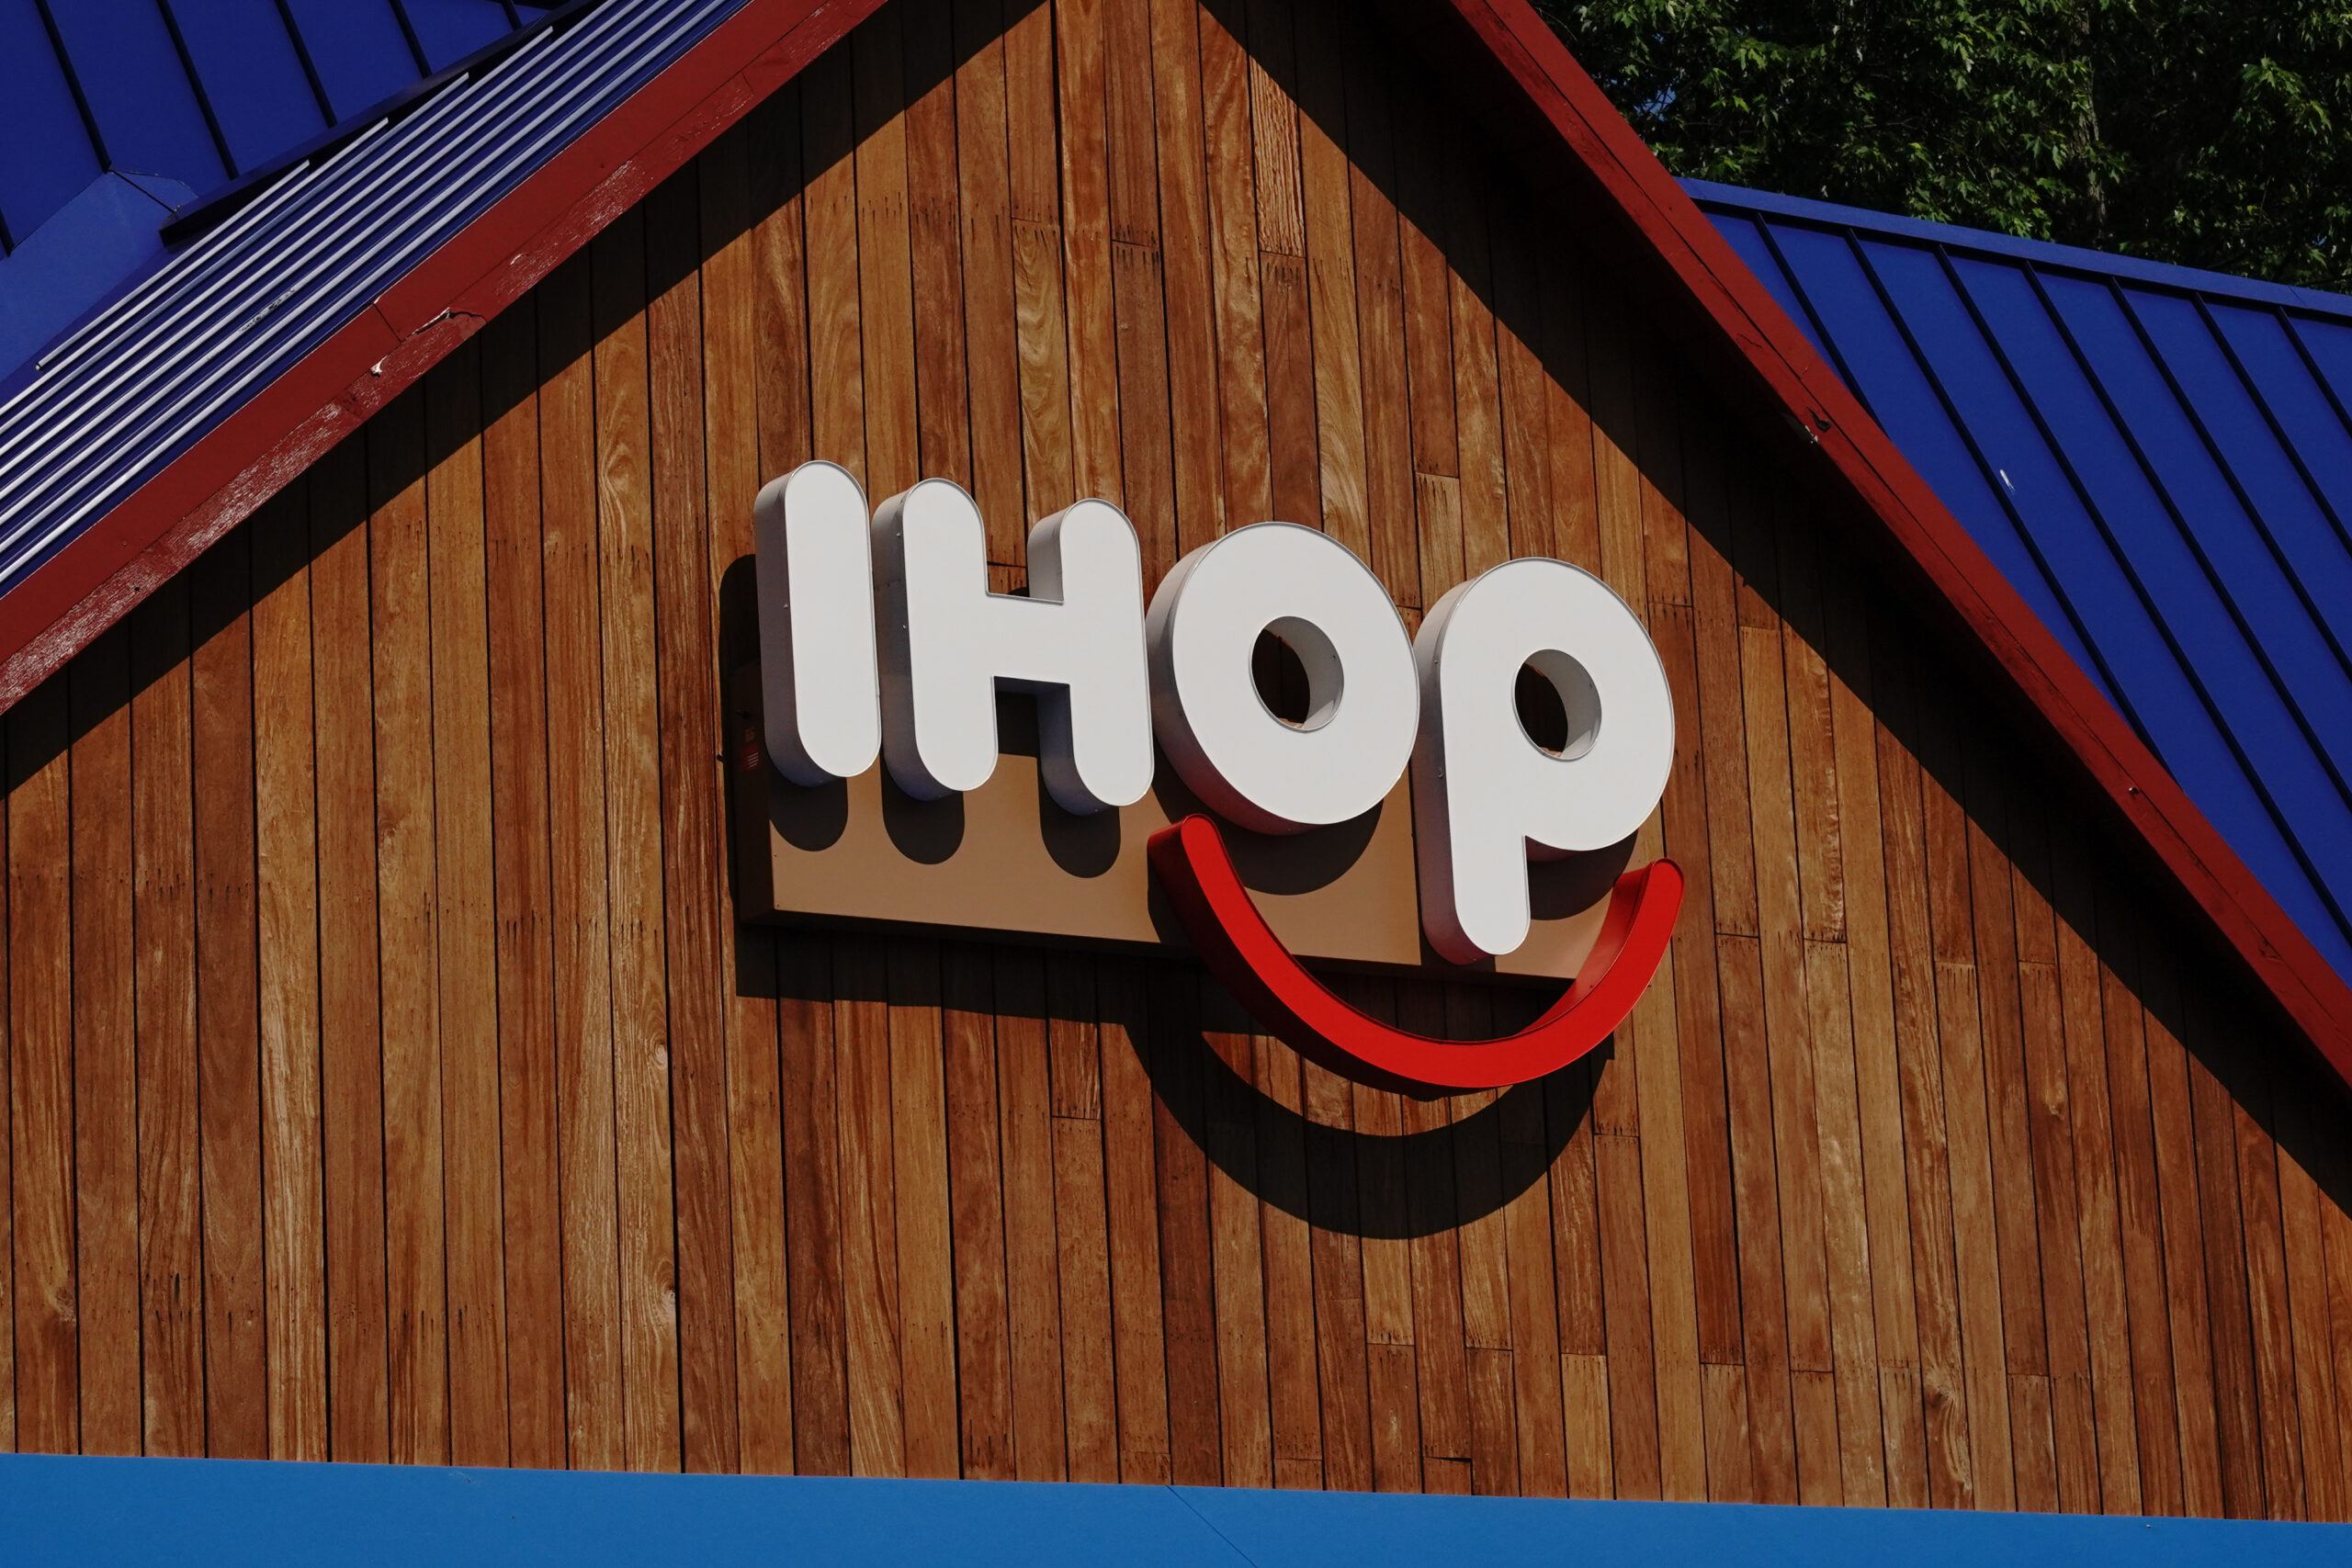 Two Virginia Inmates Arrested At IHOP After Digging Hole Through Cell Wall Using Toothbrush, Metal Object To Escape